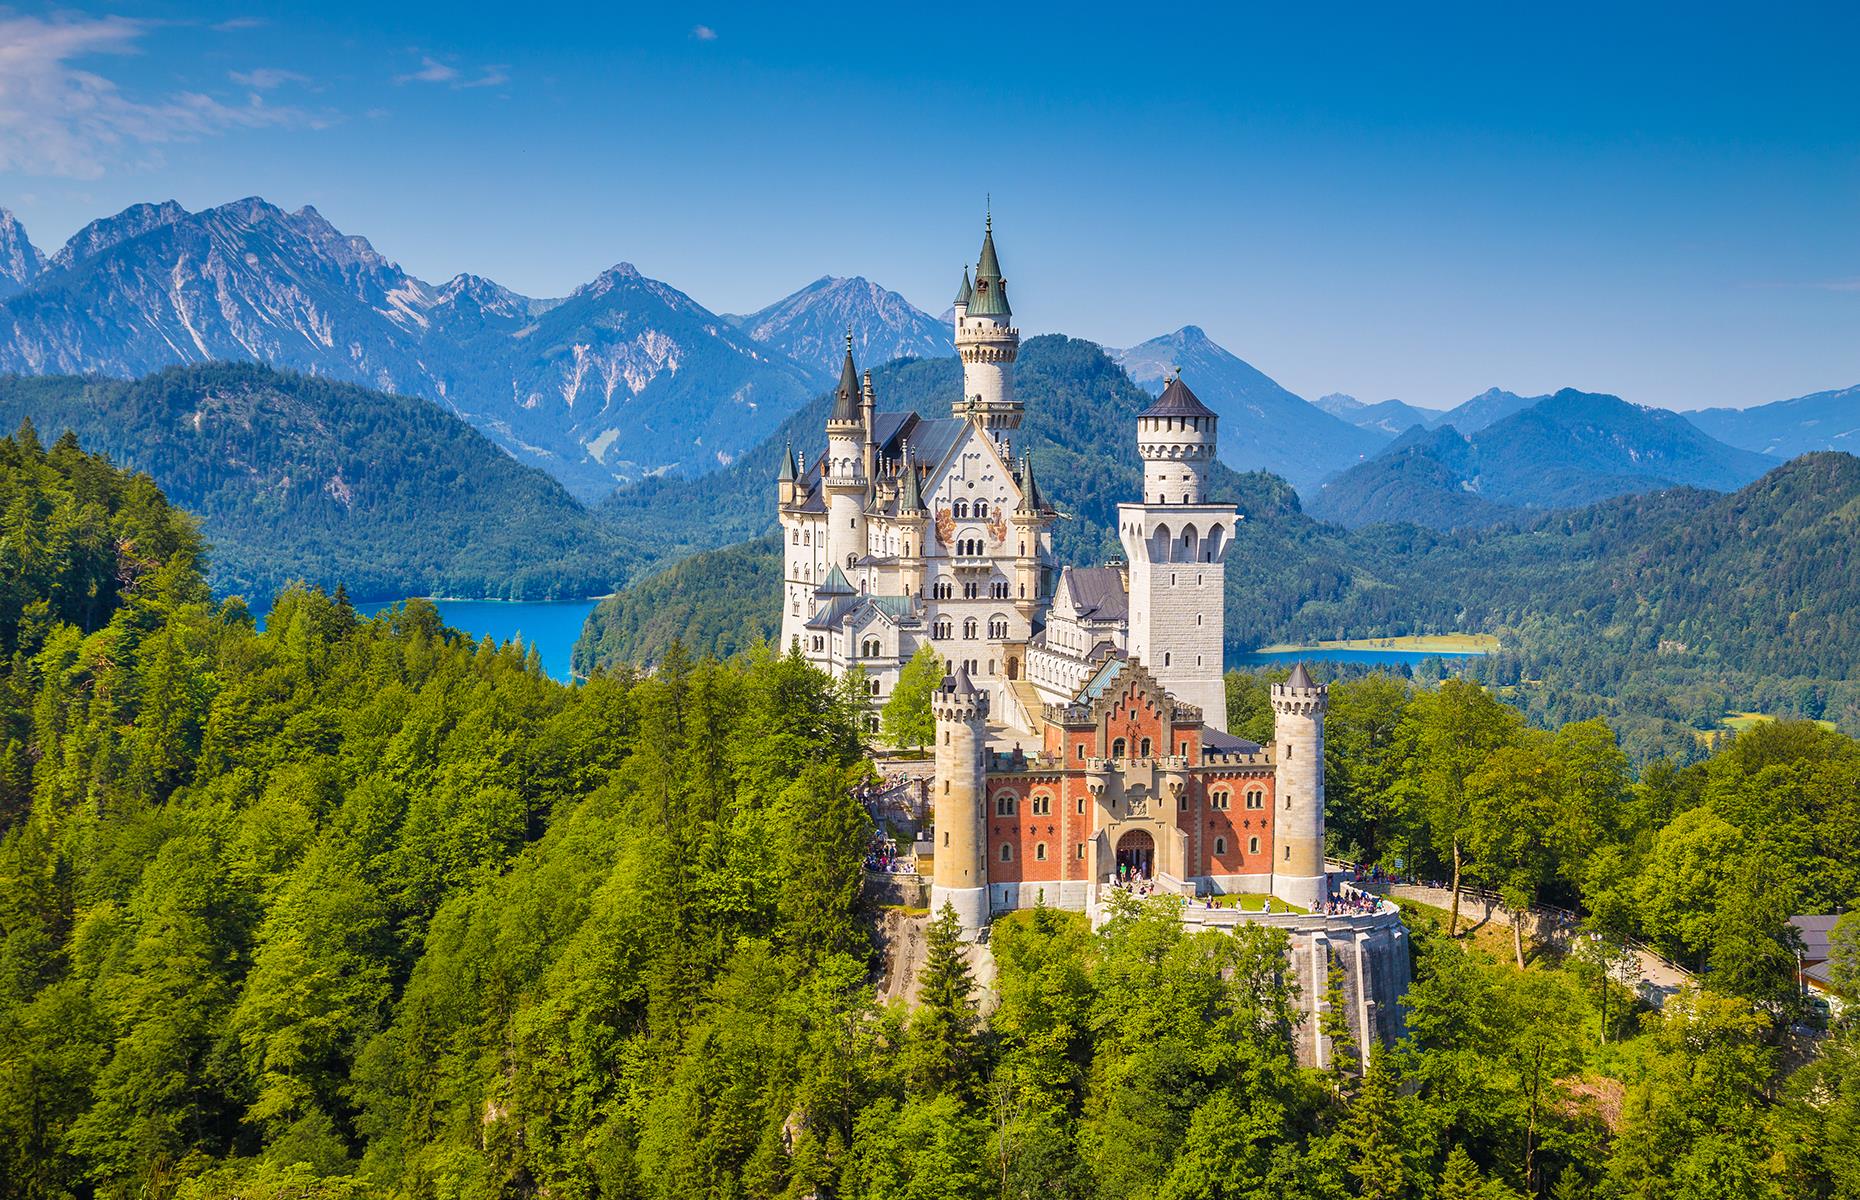 <p>The 19th-century Neuschwanstein Castle, perched on a hill high above the Bavarian countryside, is one of the most famous in the world. Put your best hiking boots on and trek up the rugged hill to explore the idyllic castle and its astonishing interior.</p>  <p><strong><a href="https://www.loveexploring.com/gallerylist/67038/30-of-the-most-beautiful-european-castles">We think these are the best castles Europe has to offer</a></strong></p>